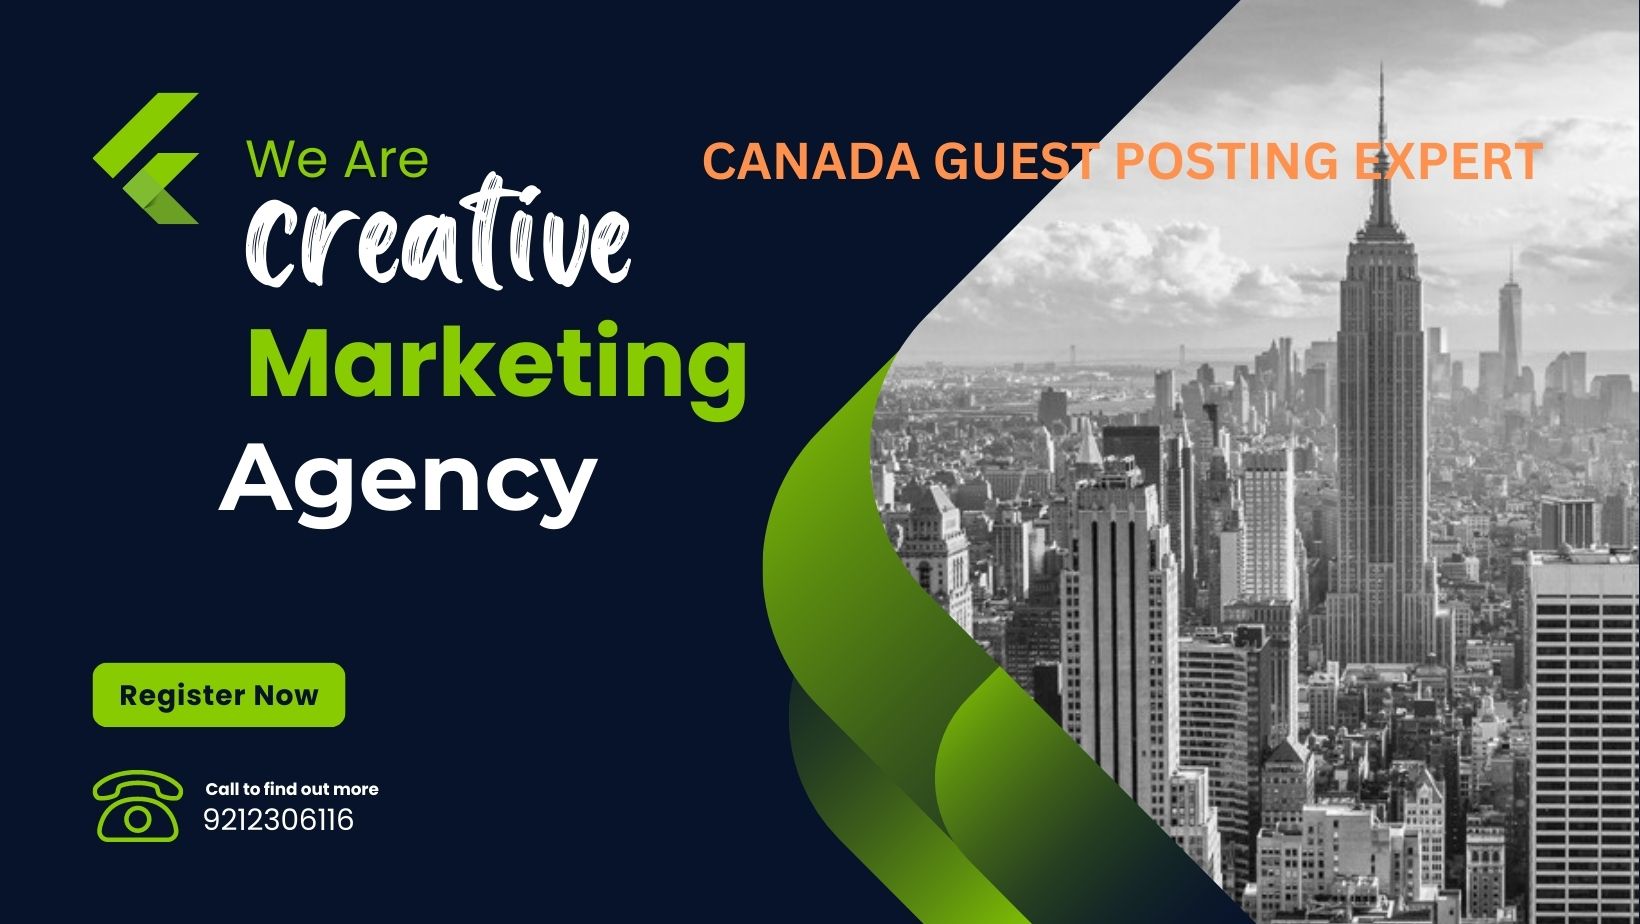 The Impact of Canadian Guest Posting on Your Business